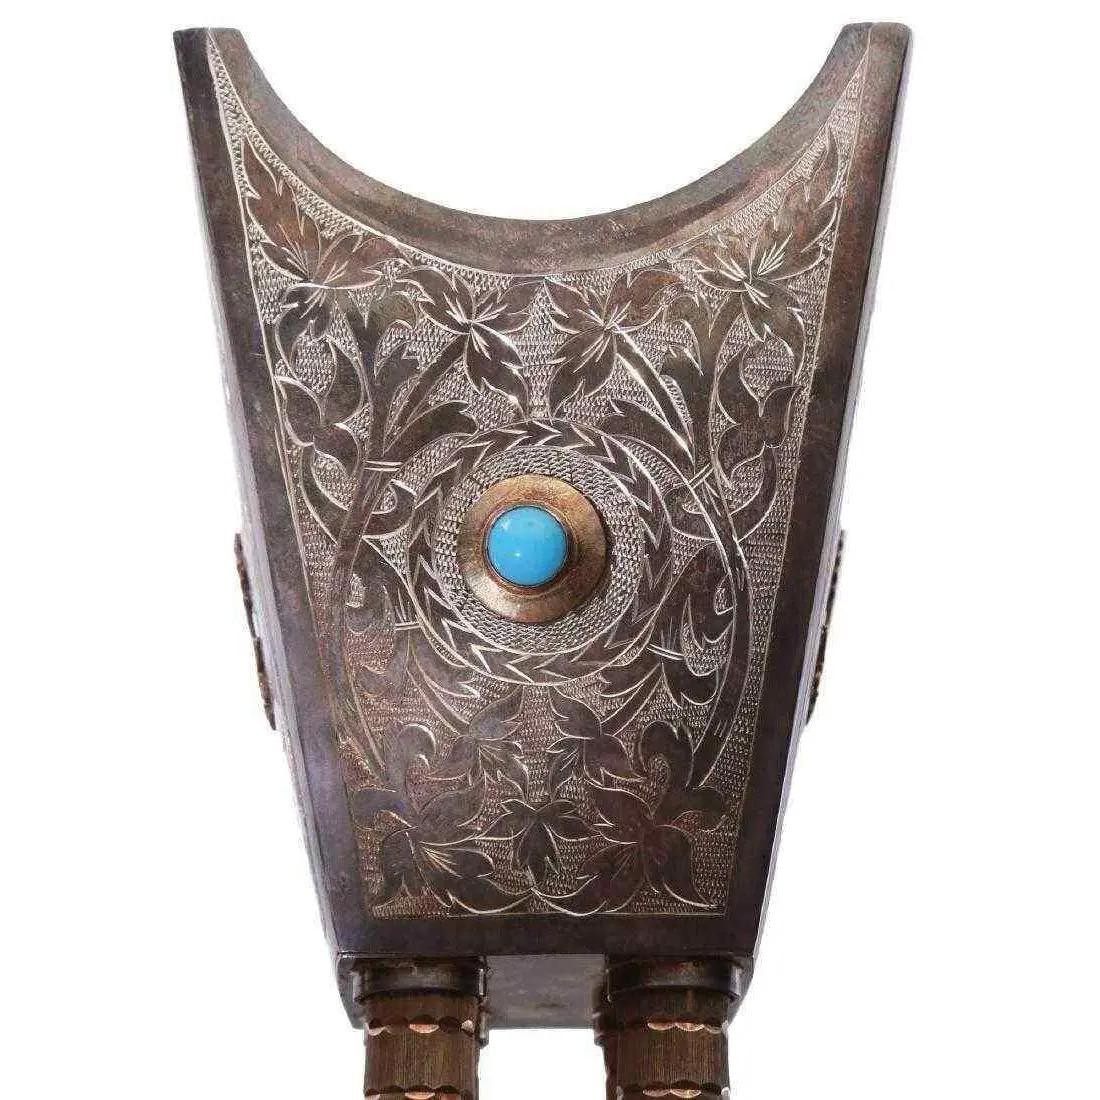 Saudi Arabian silver and gold incense Bukhur burner vase with turquoise and royal coat of arms.

Measures: 9